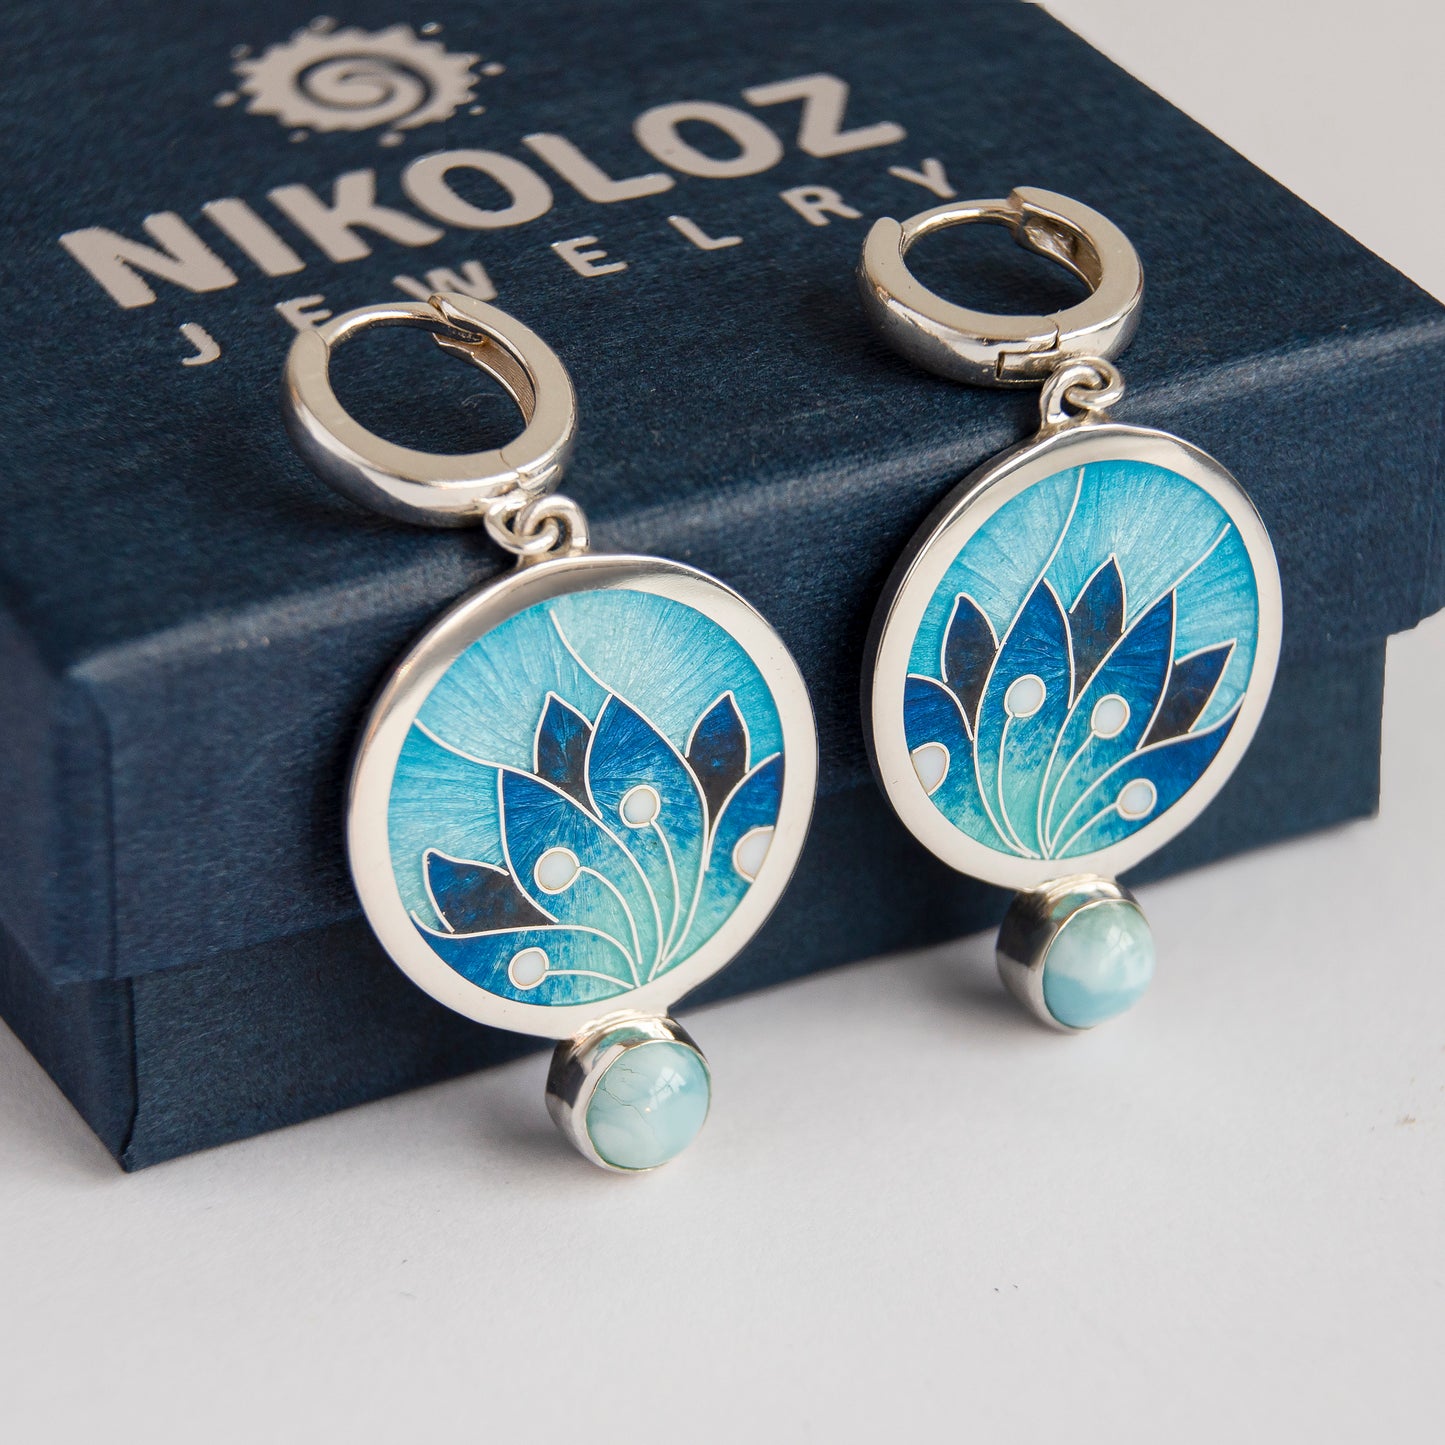 Cloisonné Enamel Turquoise Earrings With Larimar Stone "Ice Queen"